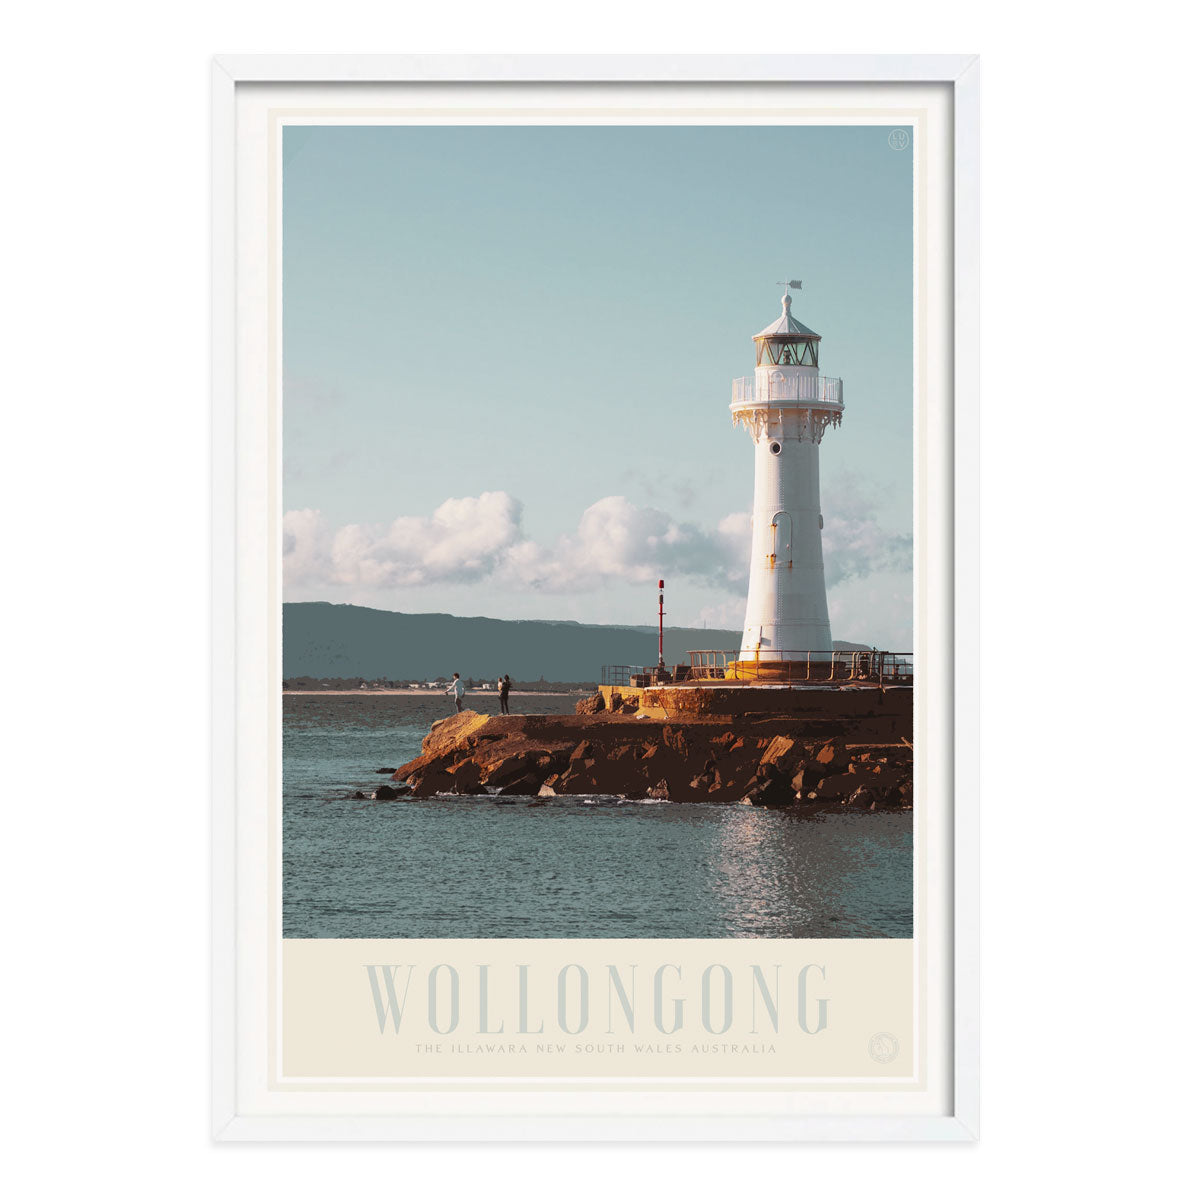 Wollongong NSW vintage retro travel poster print in white frame by Places We Luv